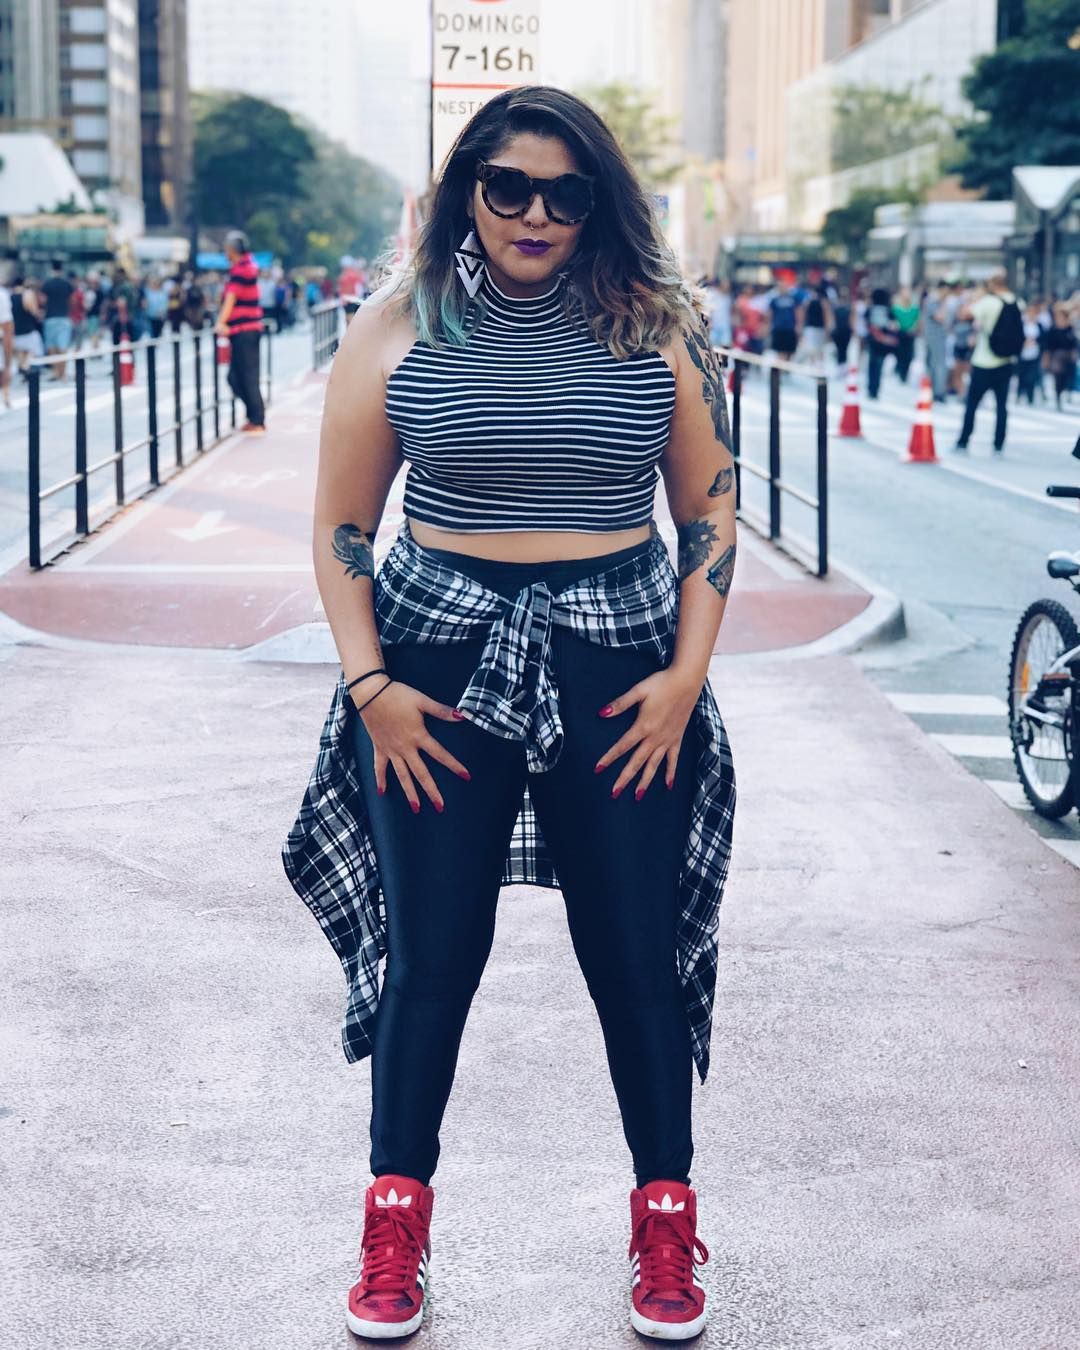 Baddie Concert Outfits 2020 | Plus Size Concert Outfits | Classy ...